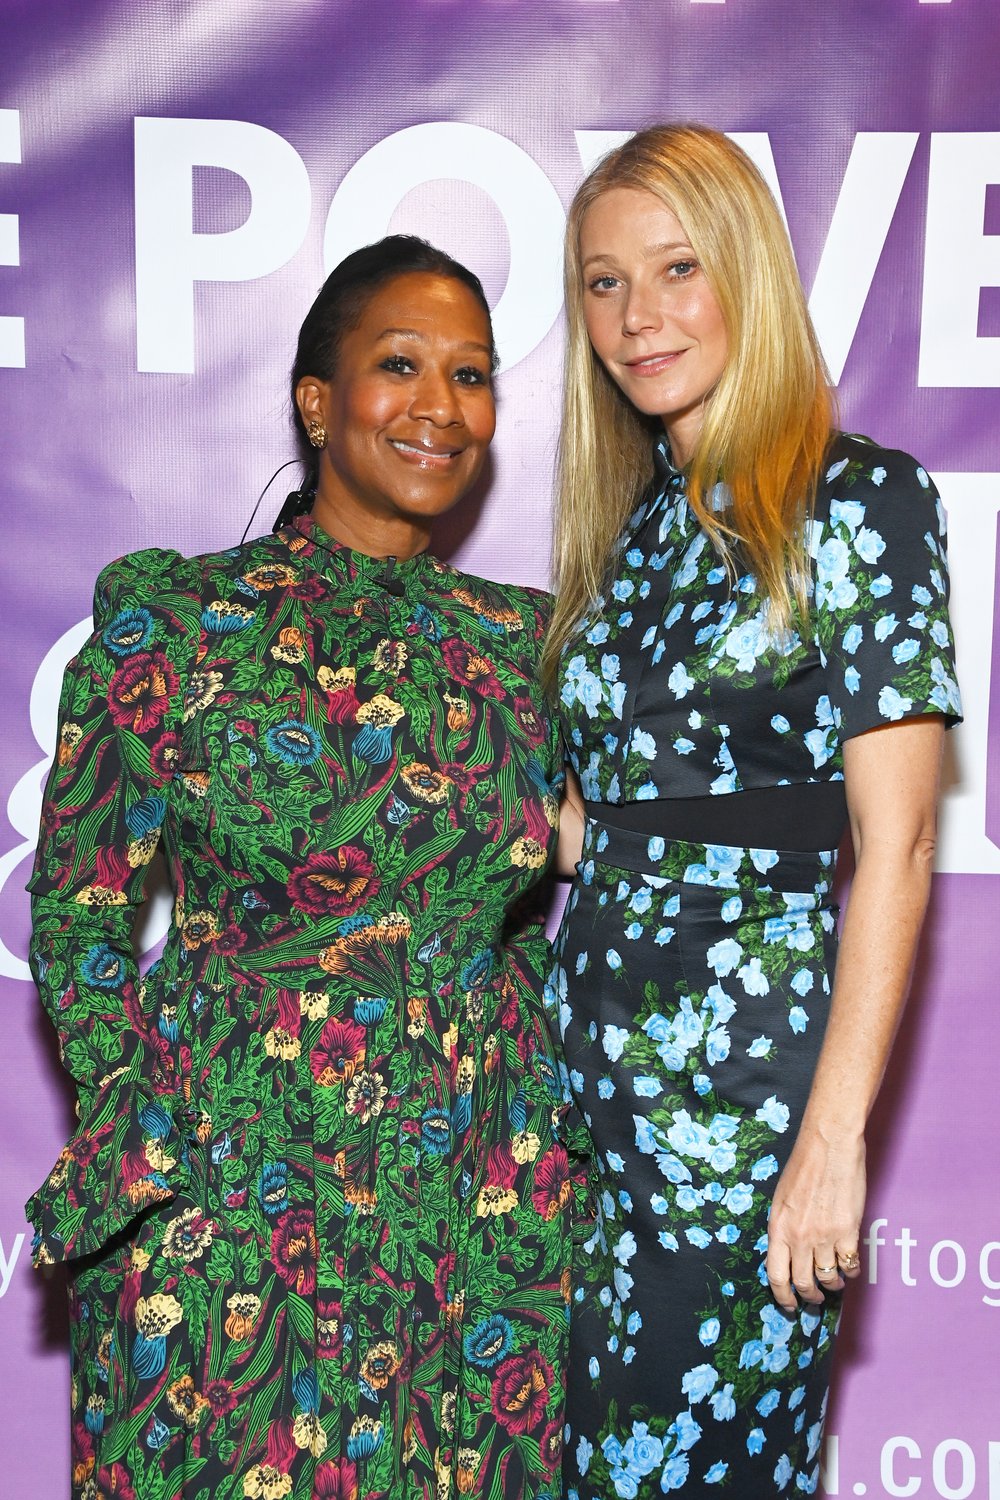   The Honorable Nicole Avant and Gwyneth Paltrow engaged in a fireside chat for Visionary Women’s International Day of Women summit  